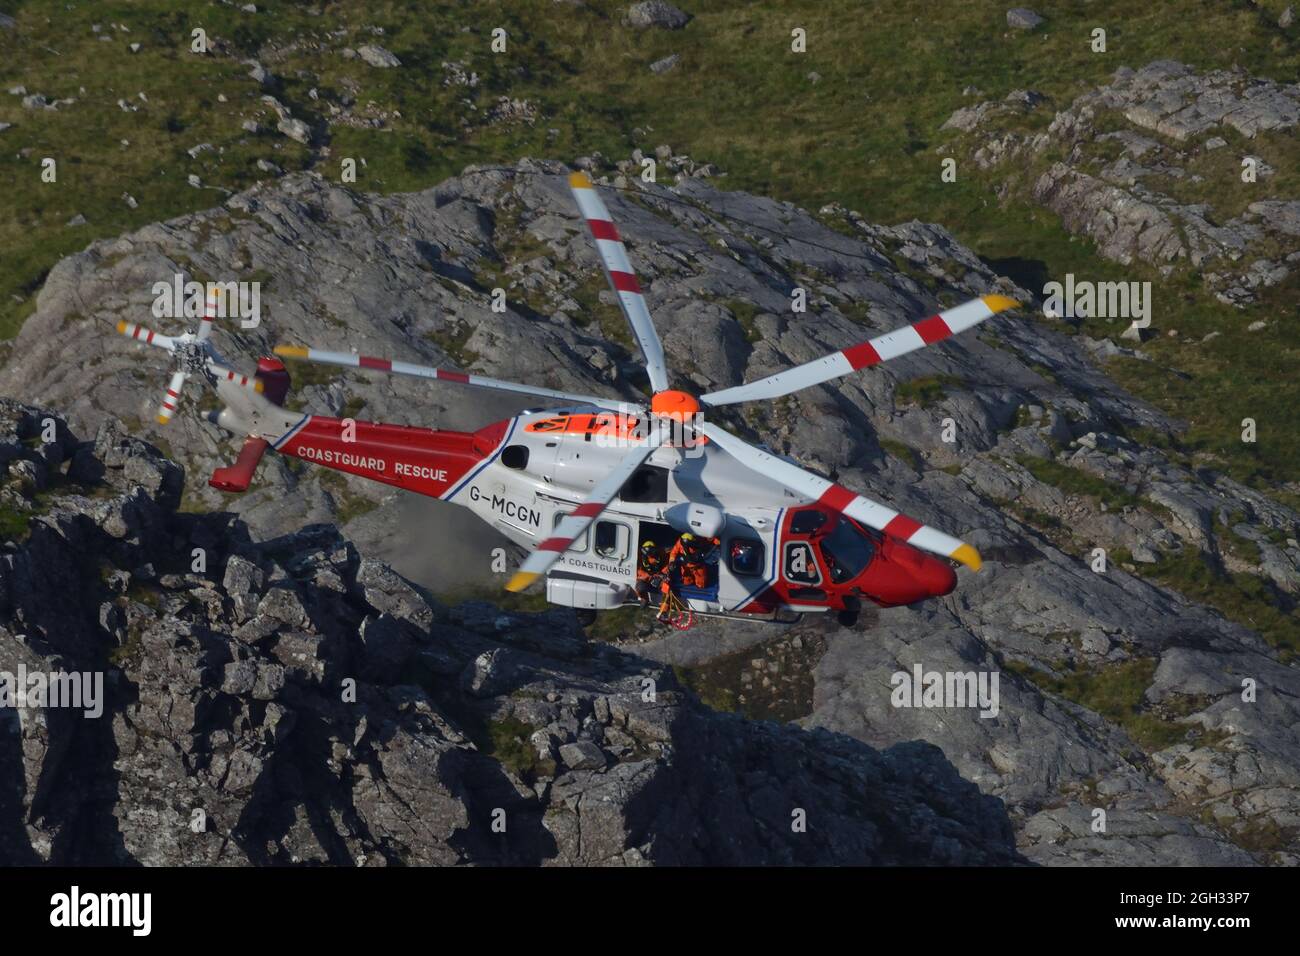 An AW189 helicopter of Her Majesty's coastguard carrying out a mountain rescue on the north face of Ben Nevis, Scottish Highlands, UK Stock Photo